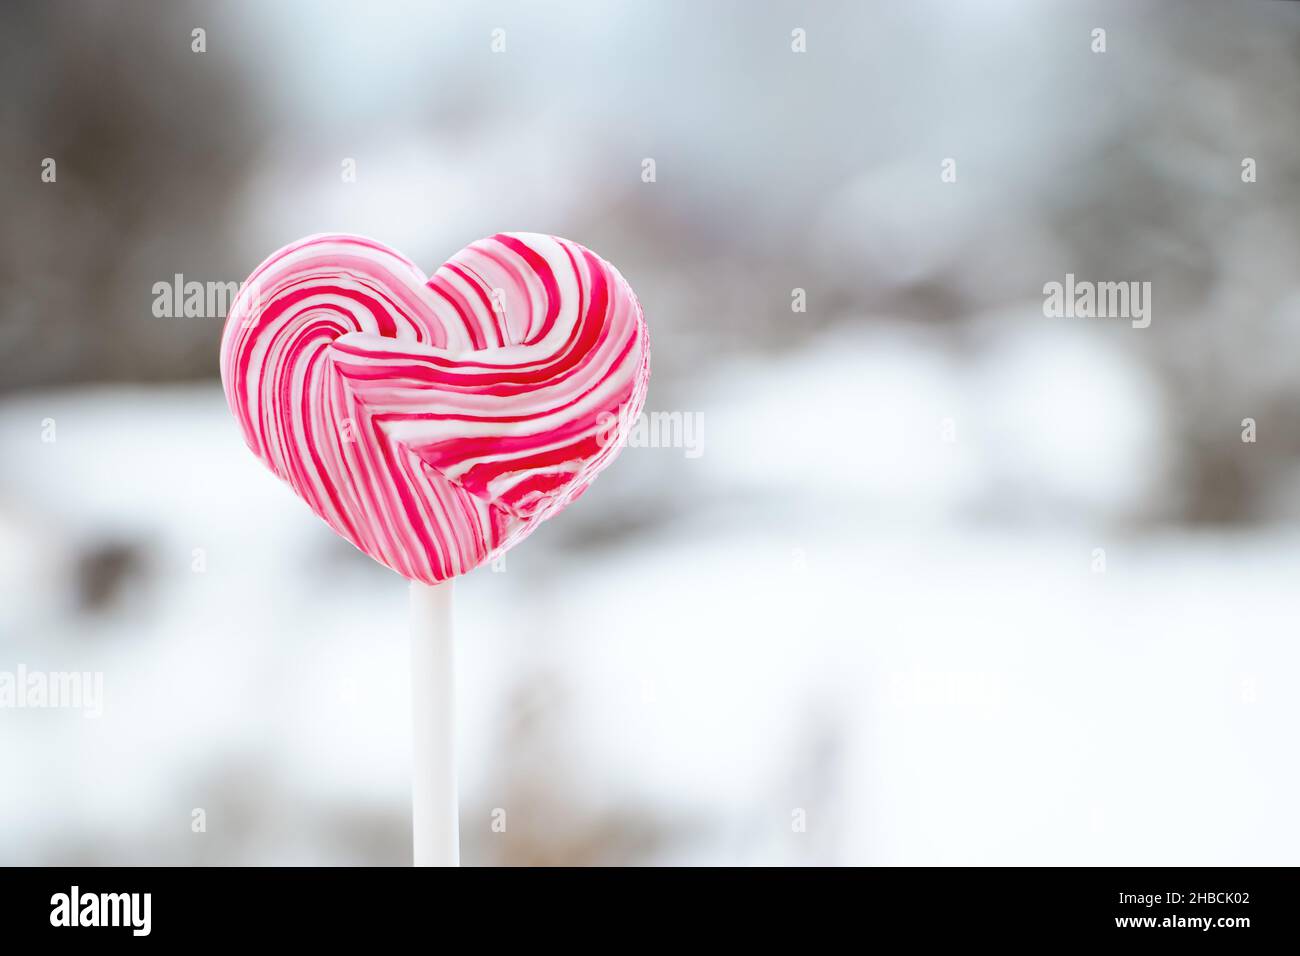 Heart shaped pink lollipop. Caramel candy on a stick. Sweet gift for valentines day. Stock Photo